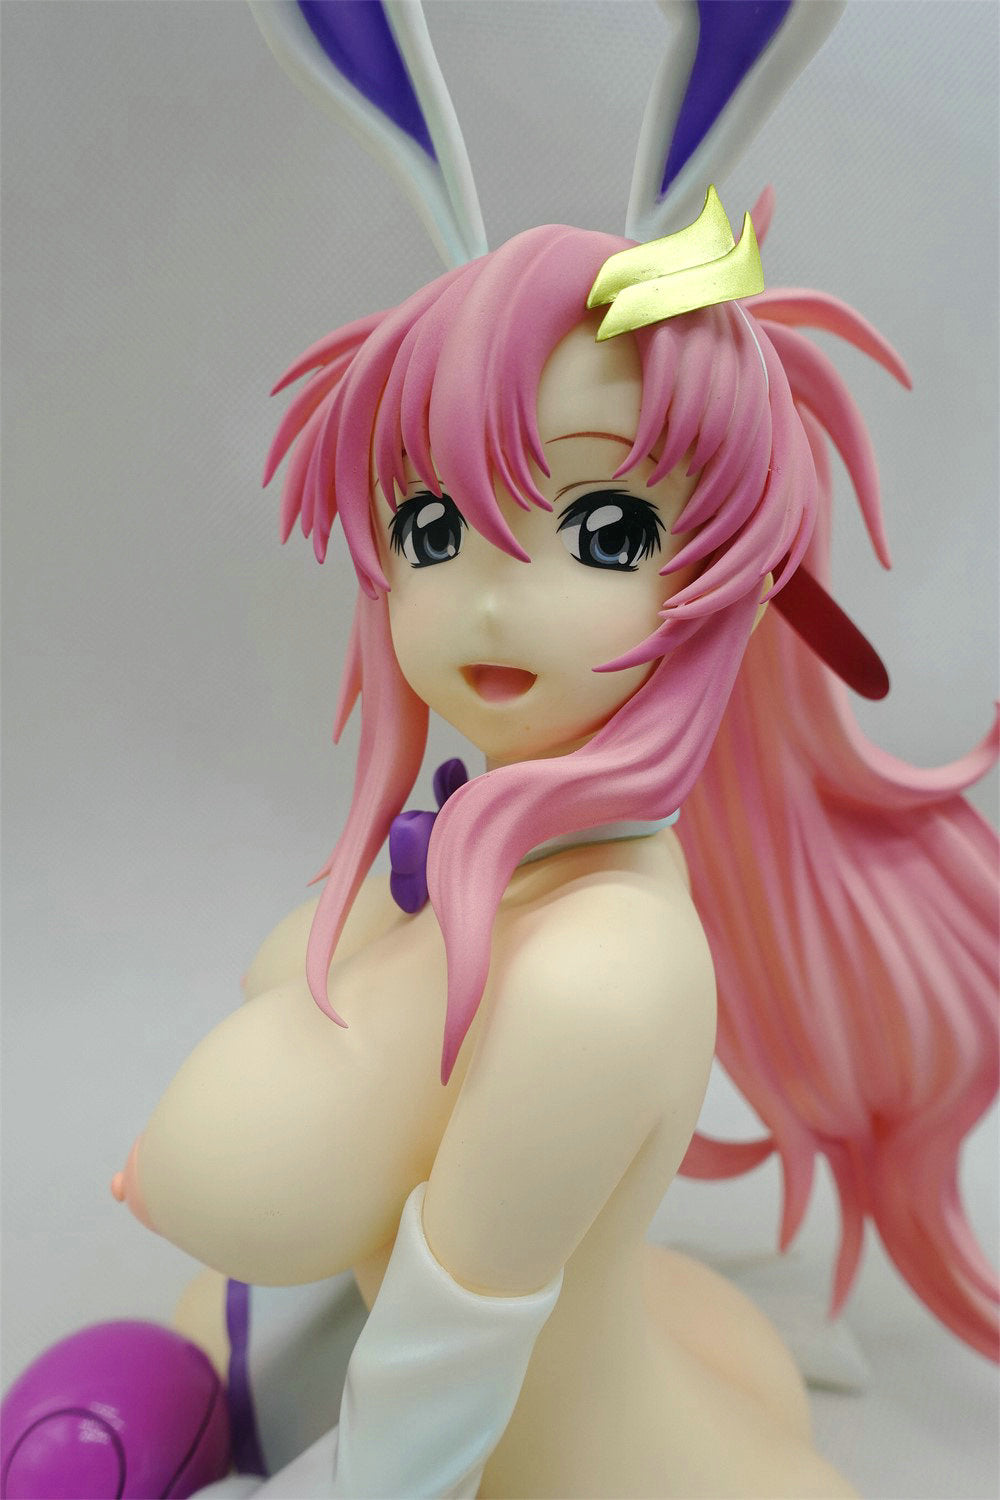 B-style: Mobile Suit Gundam SEED - Lacus Clyne Bunny Ver. 1/4 naked anime figure sexy